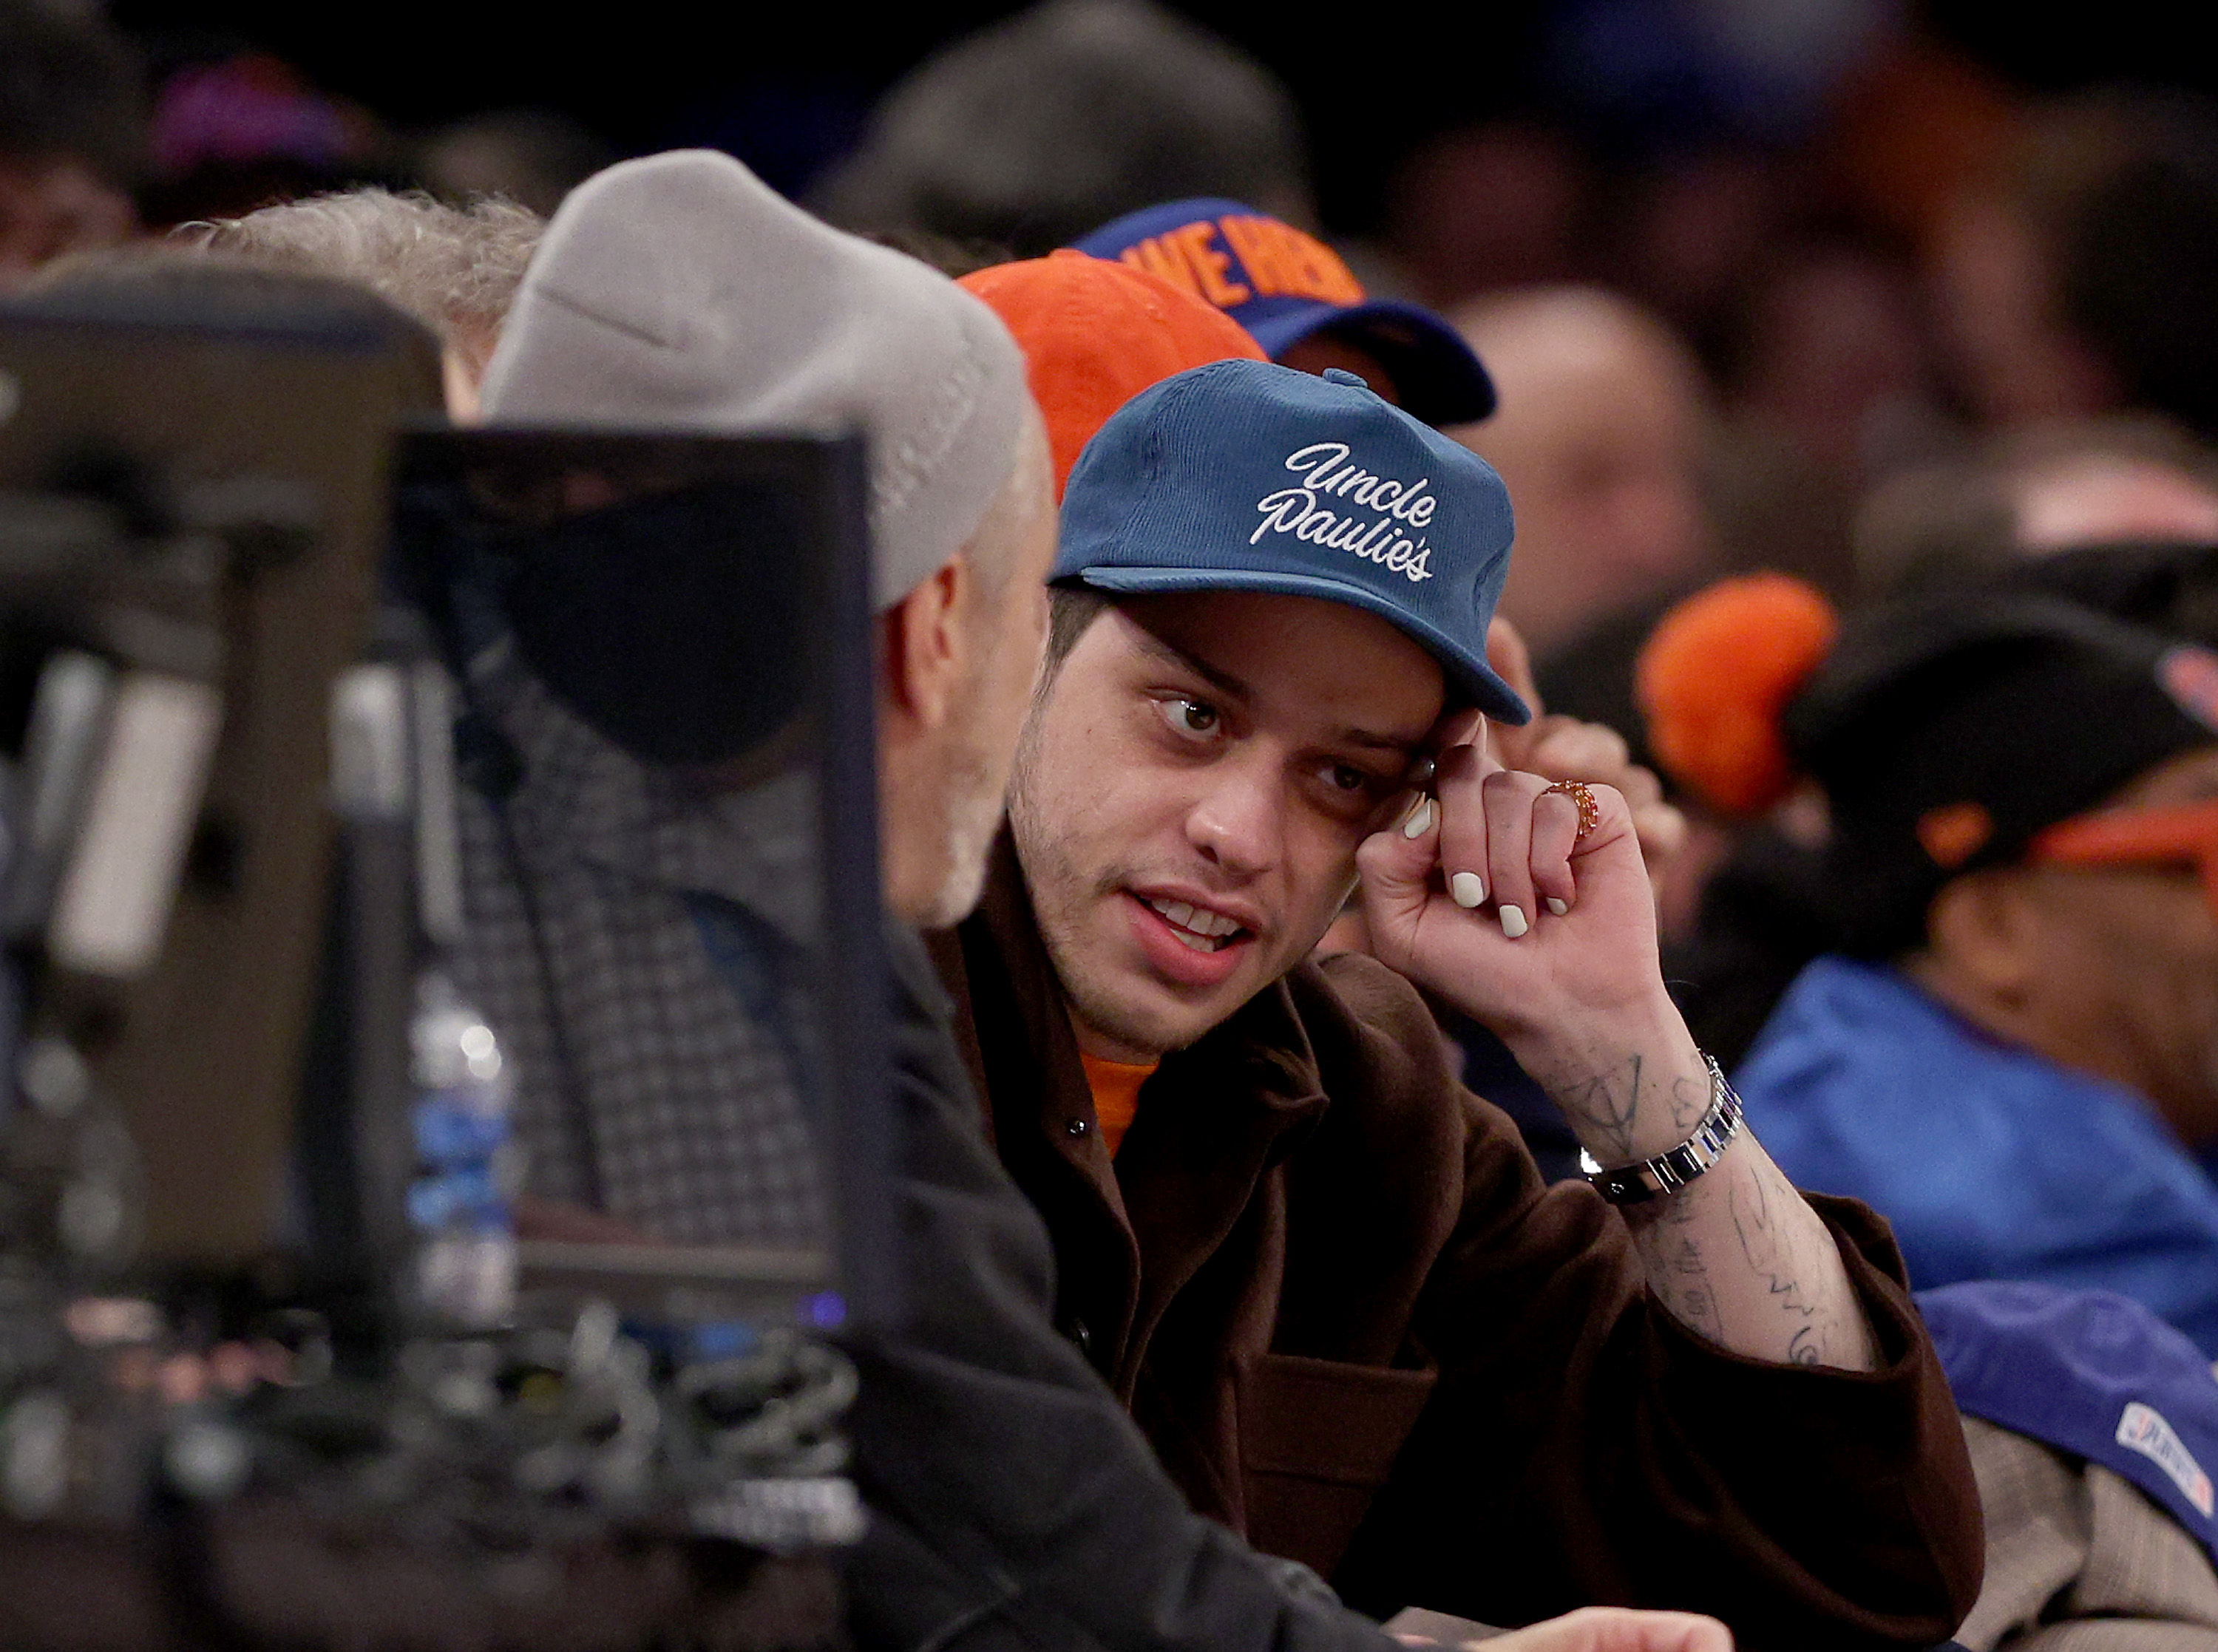 Pete Davidson is spotted at the New York Knicks and the Dallas Mavericks game at Madison Square Garden in January 2022